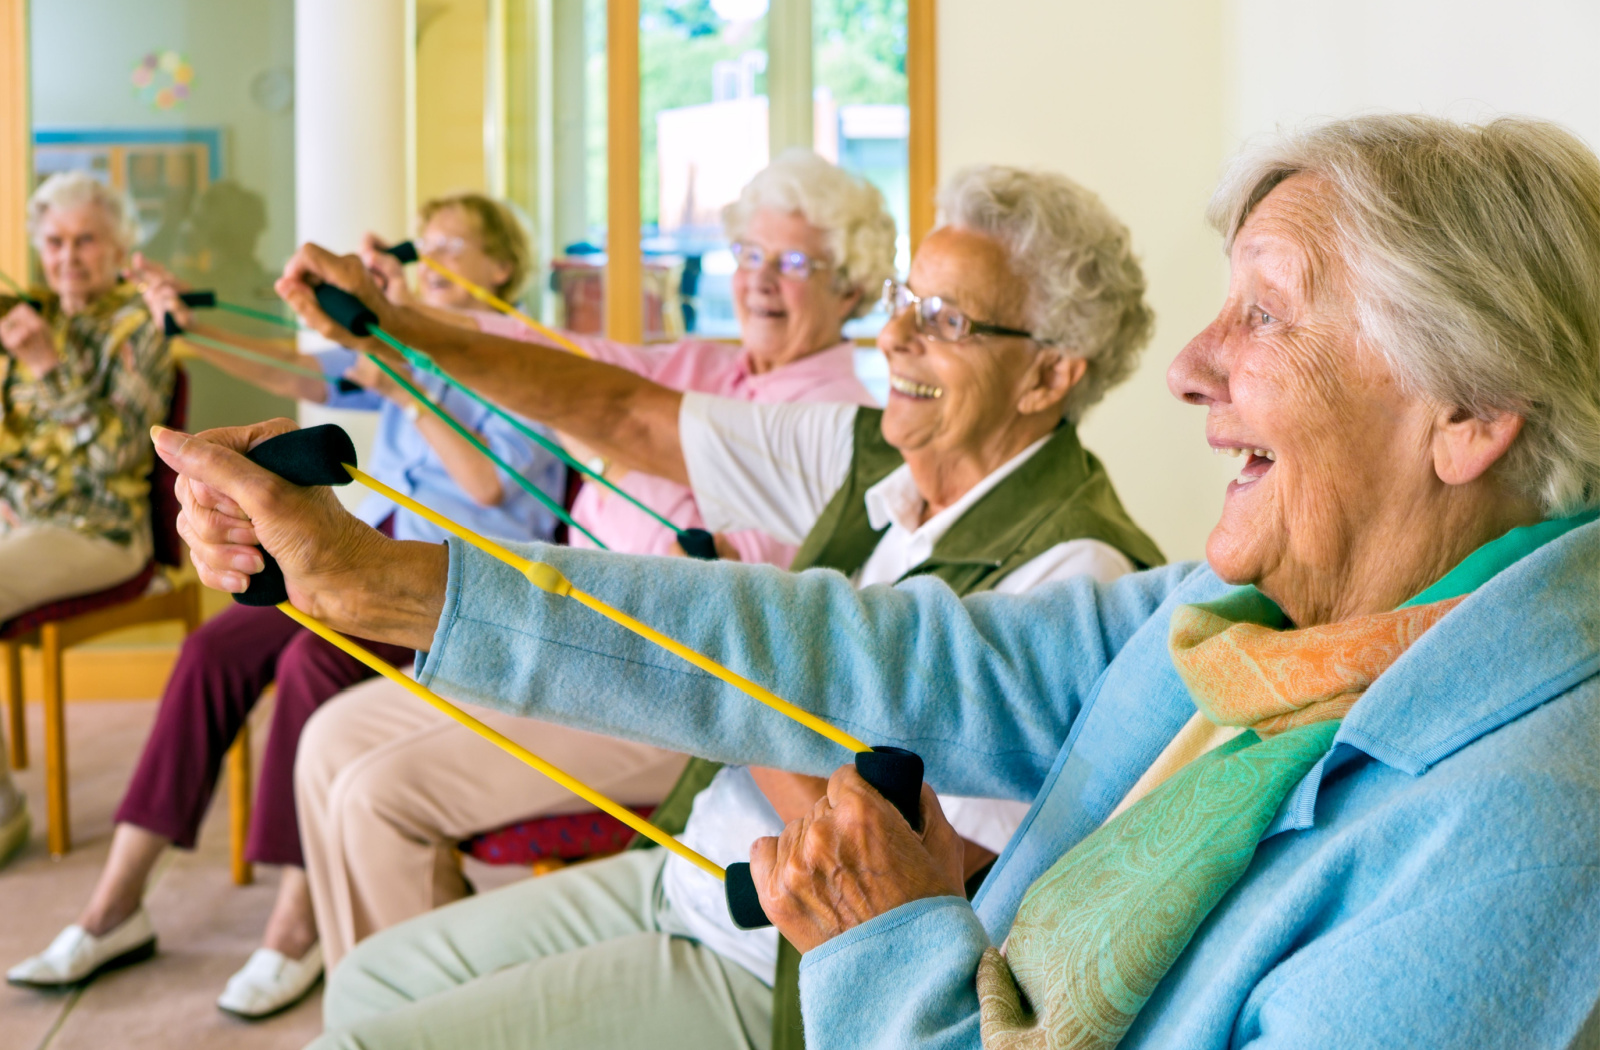 A group of senior women smiling while sitting on a circle and using exercise bands.